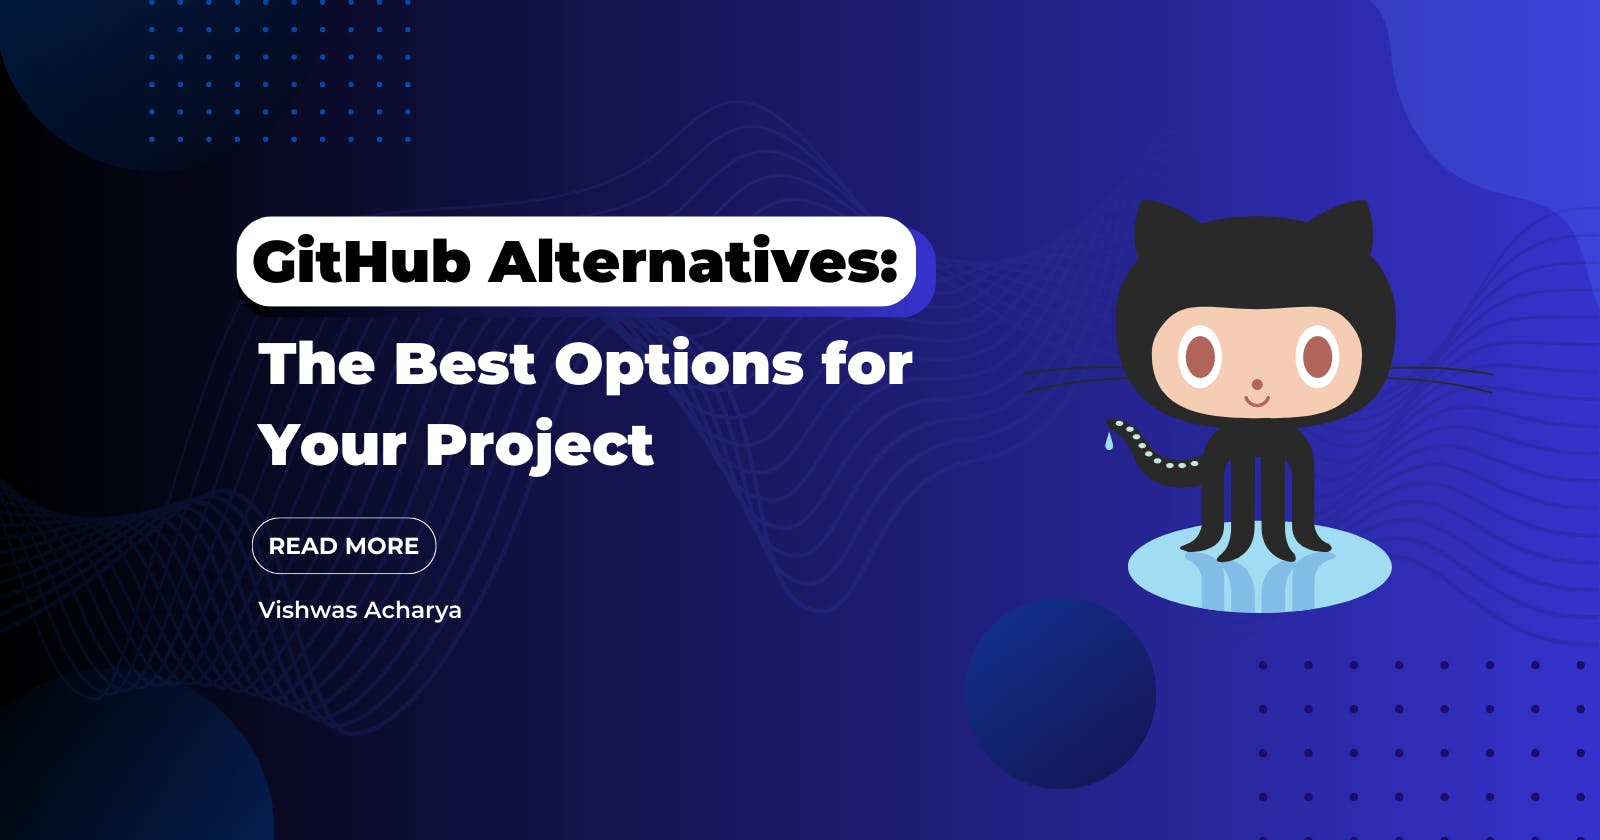 GitHub Alternatives: The Best Options for Your Project